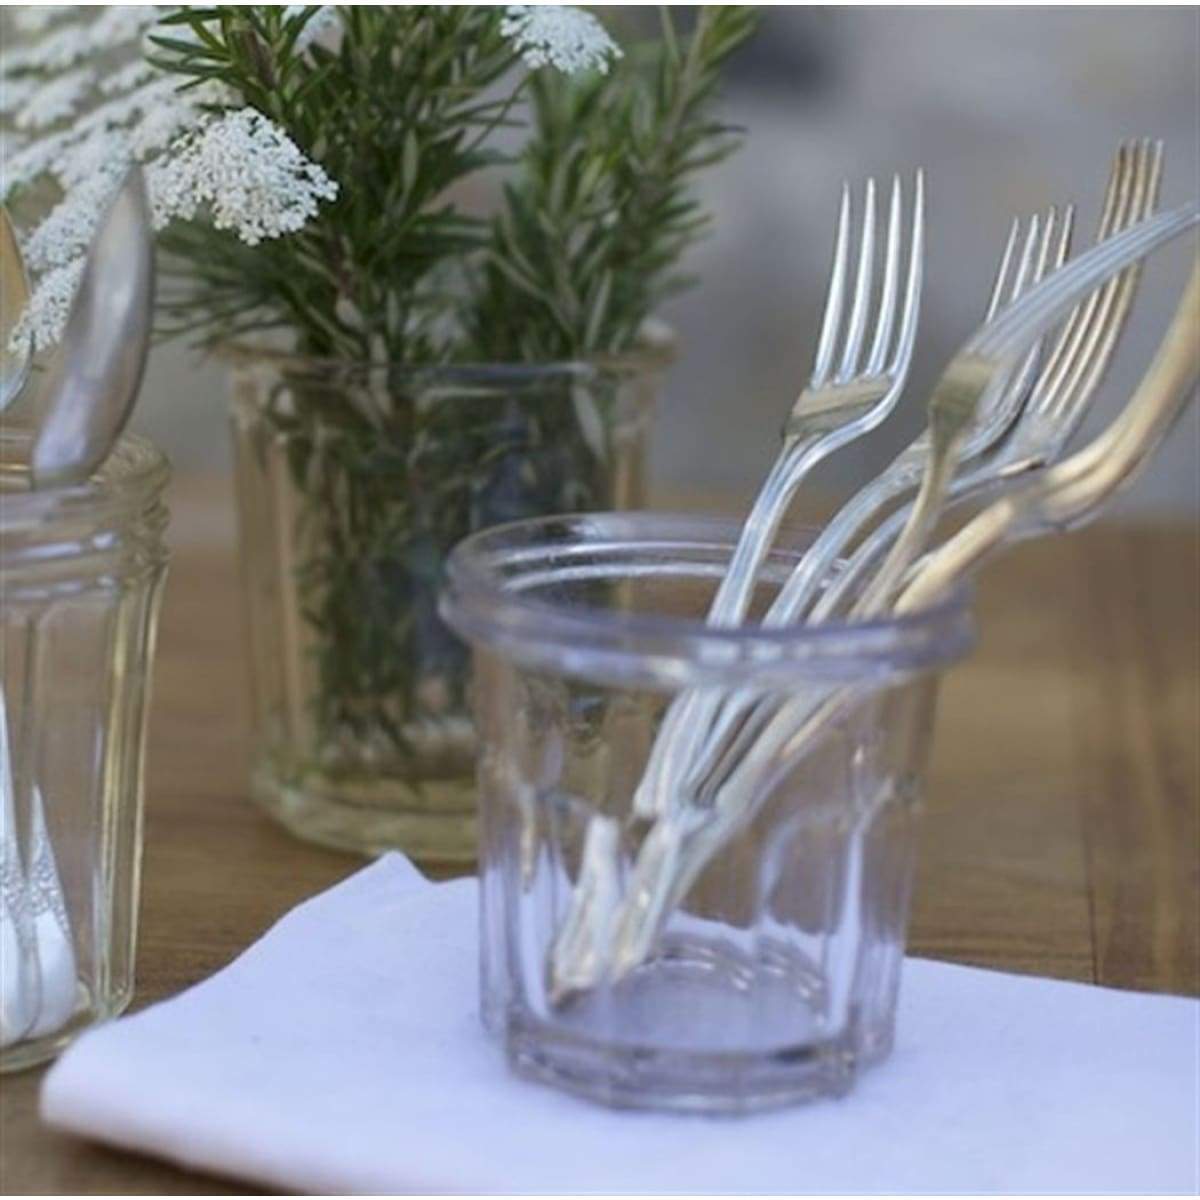 https://elsiegreen.com/cdn/shop/products/pair-of-vintage-jam-jars-the-french-kitchen-core-glass-glasses-jar-cutlery-tableware-plant-354.jpg?v=1680654993